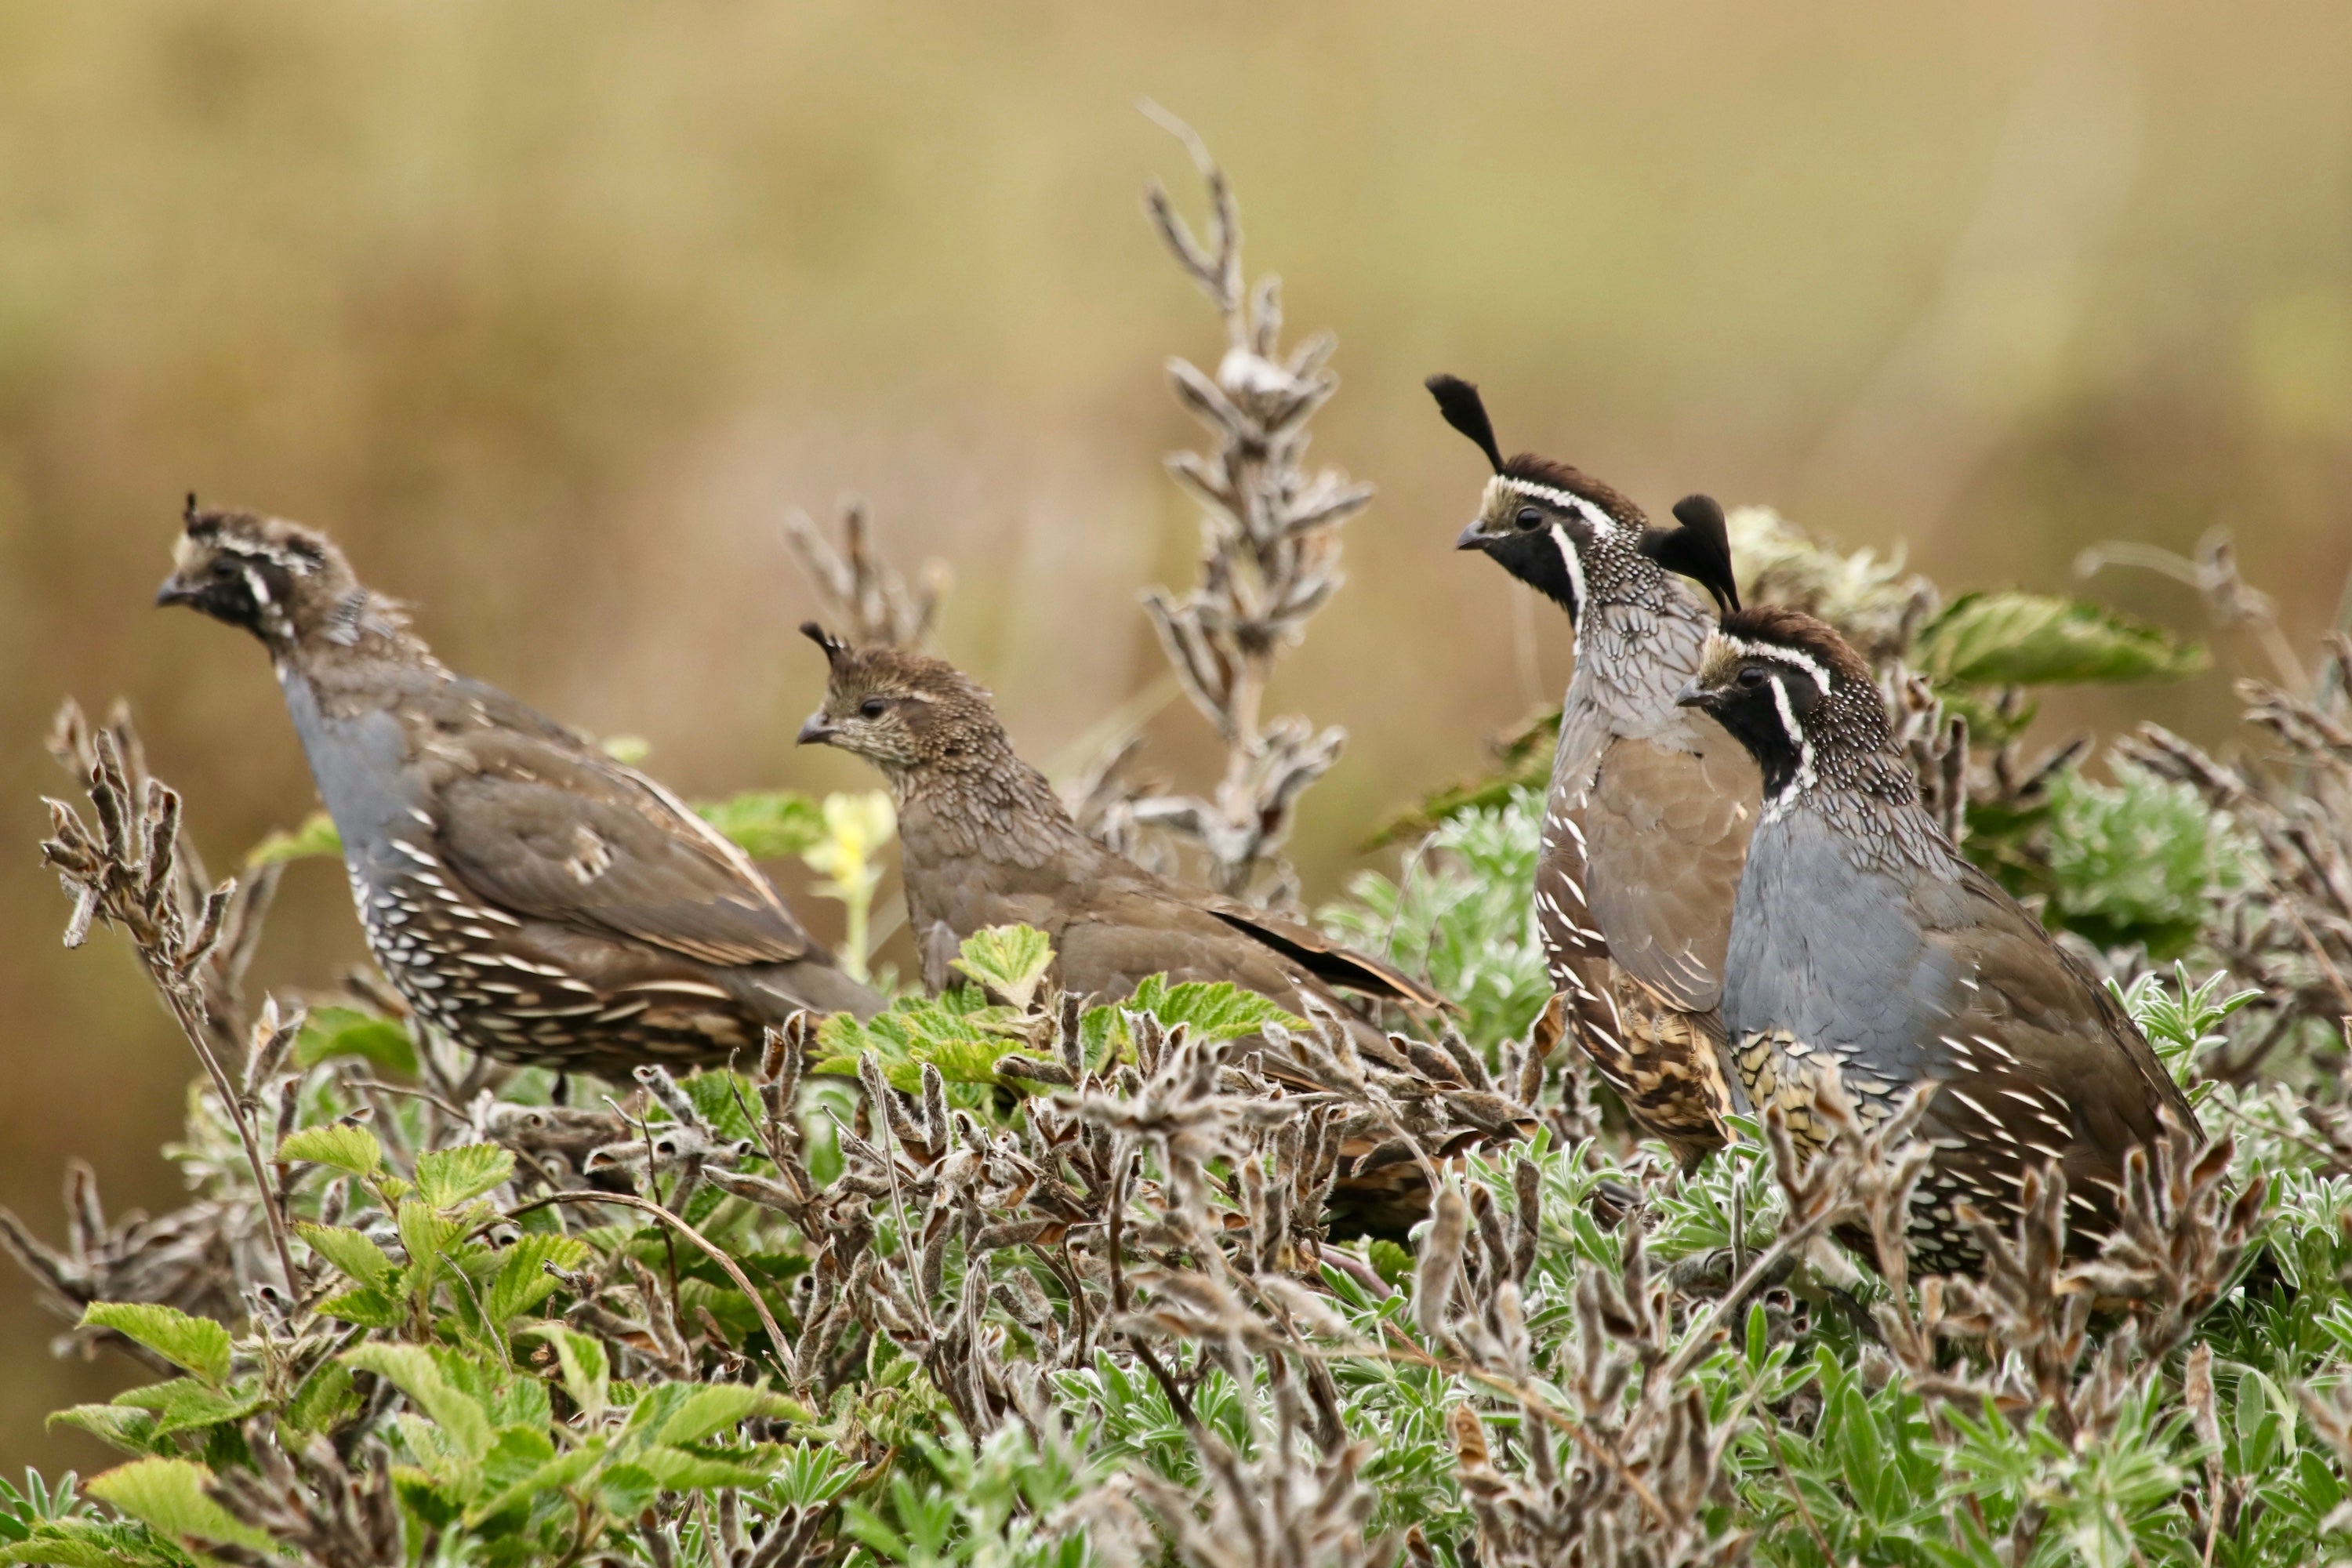 Four California quail stand among green and brown plants on the ground